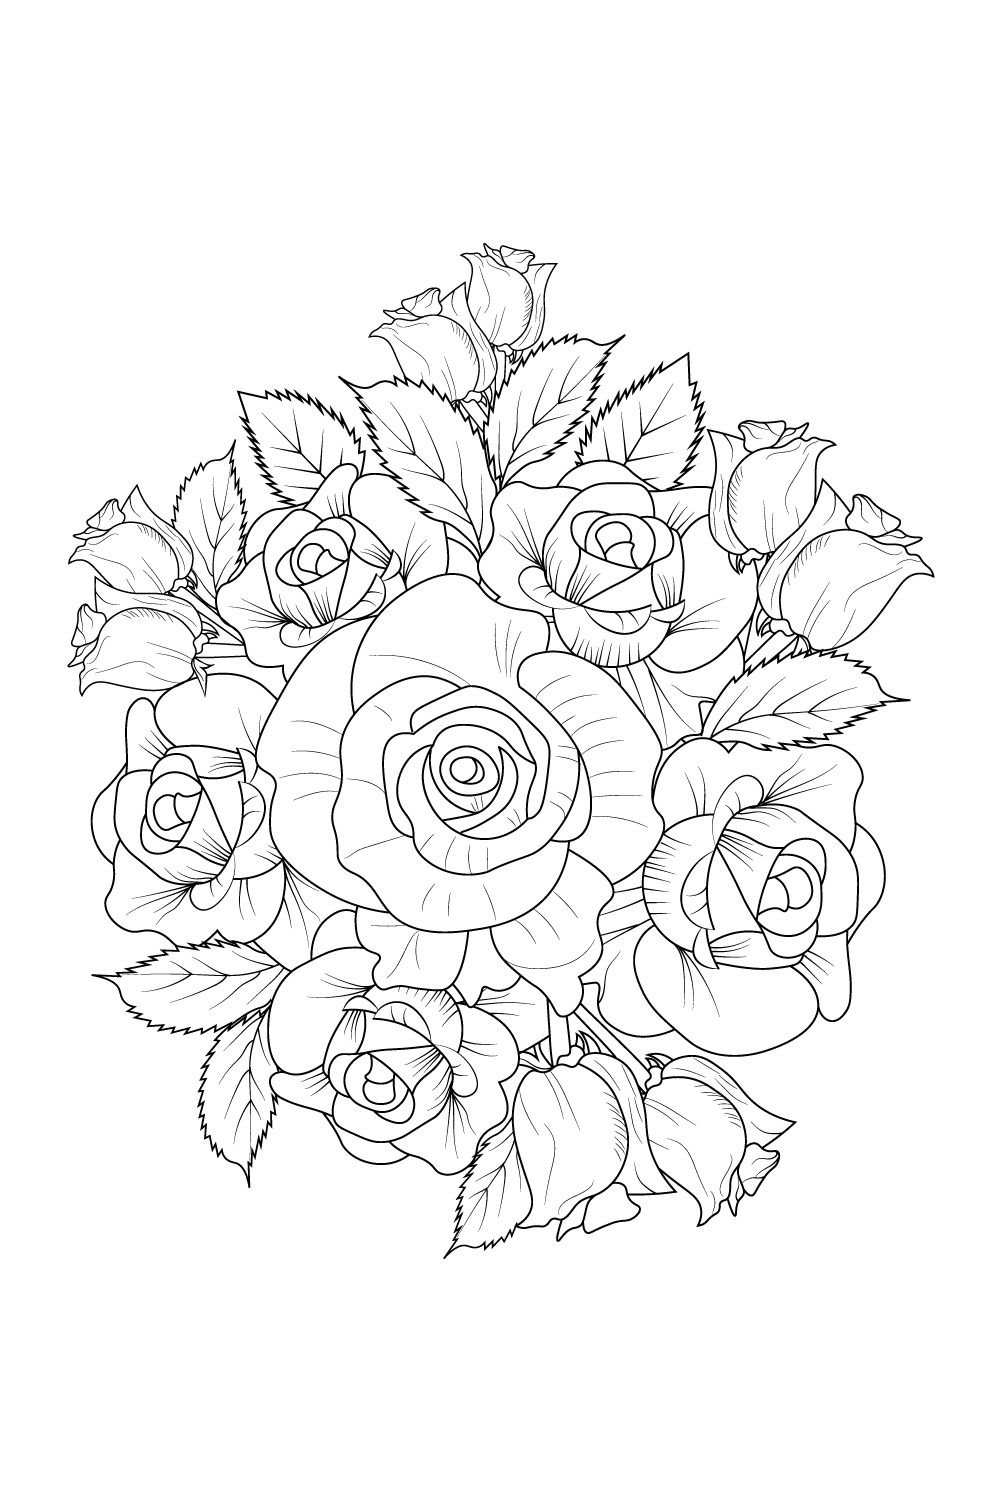 Plush Blanket rose bouquet drawing with pencil - PIXERS.UK